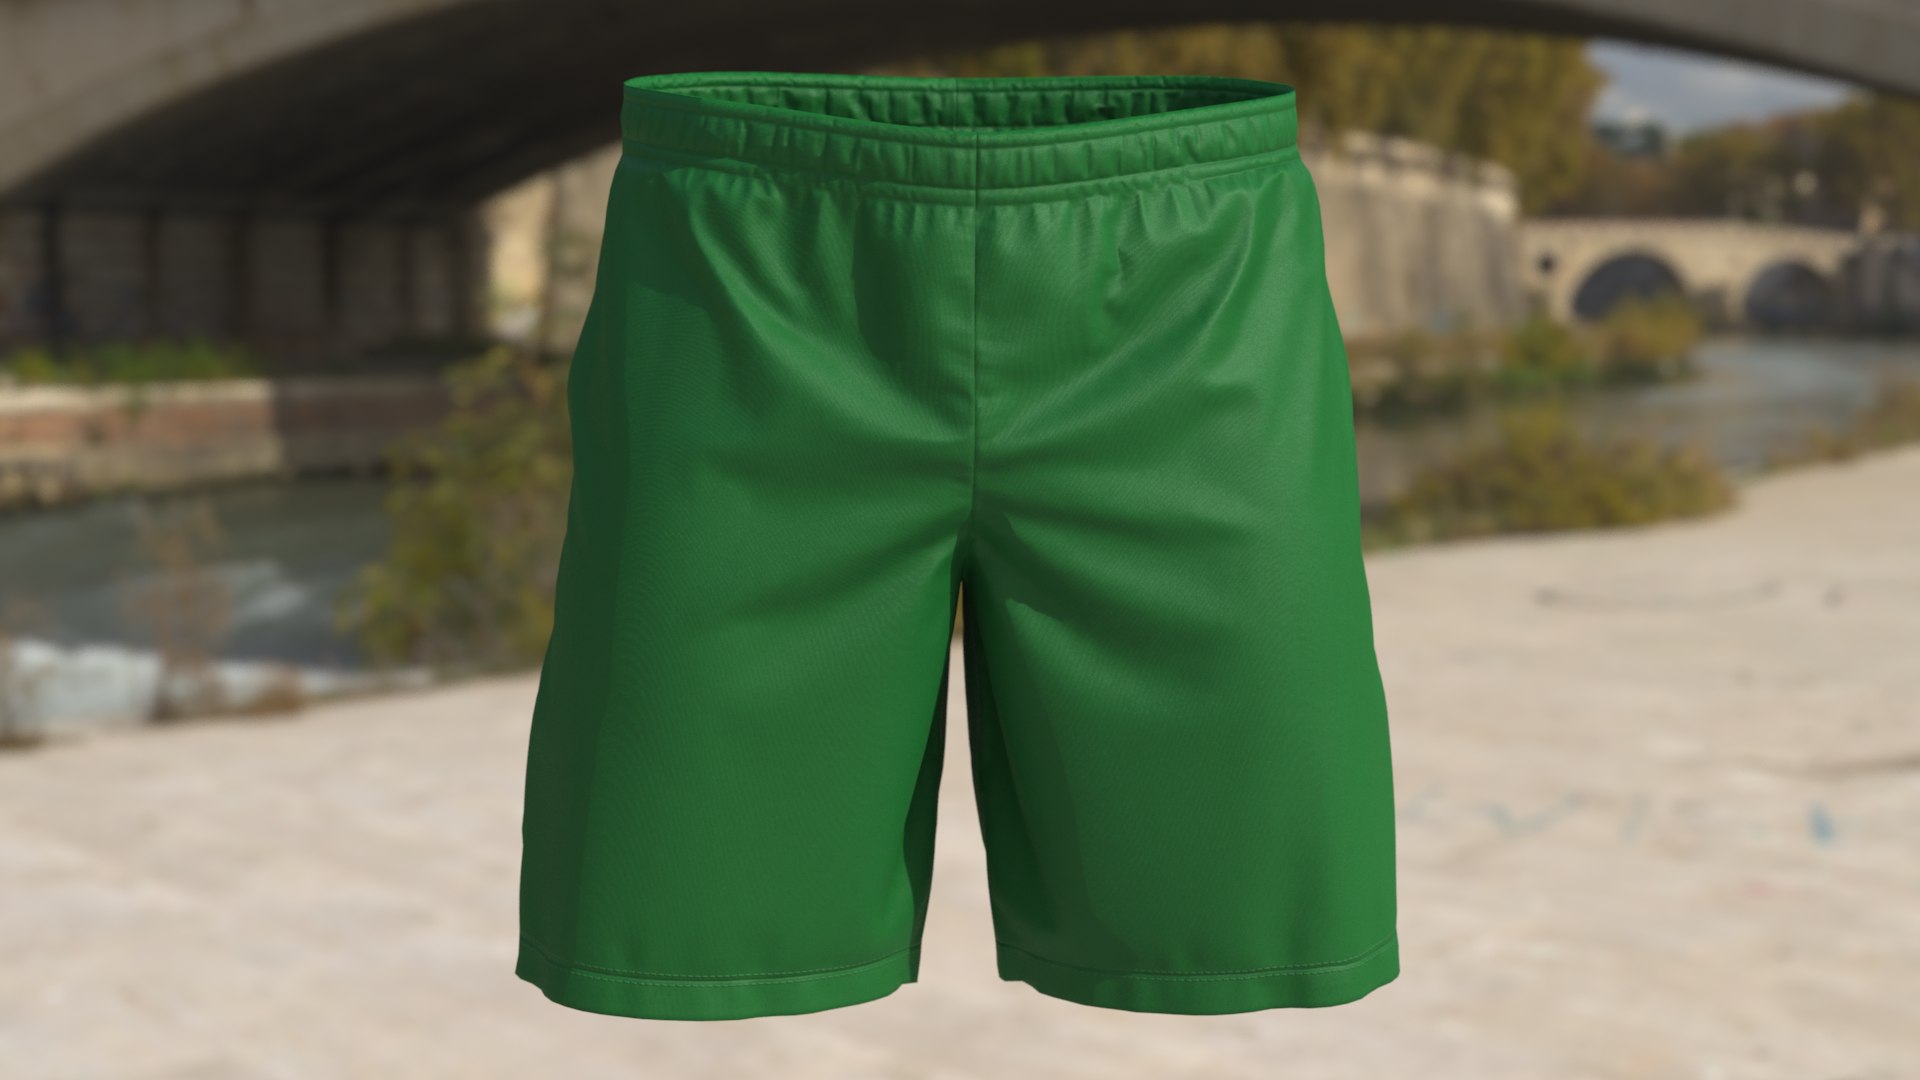 Green Polyester Shorts 3D - TurboSquid 2064015